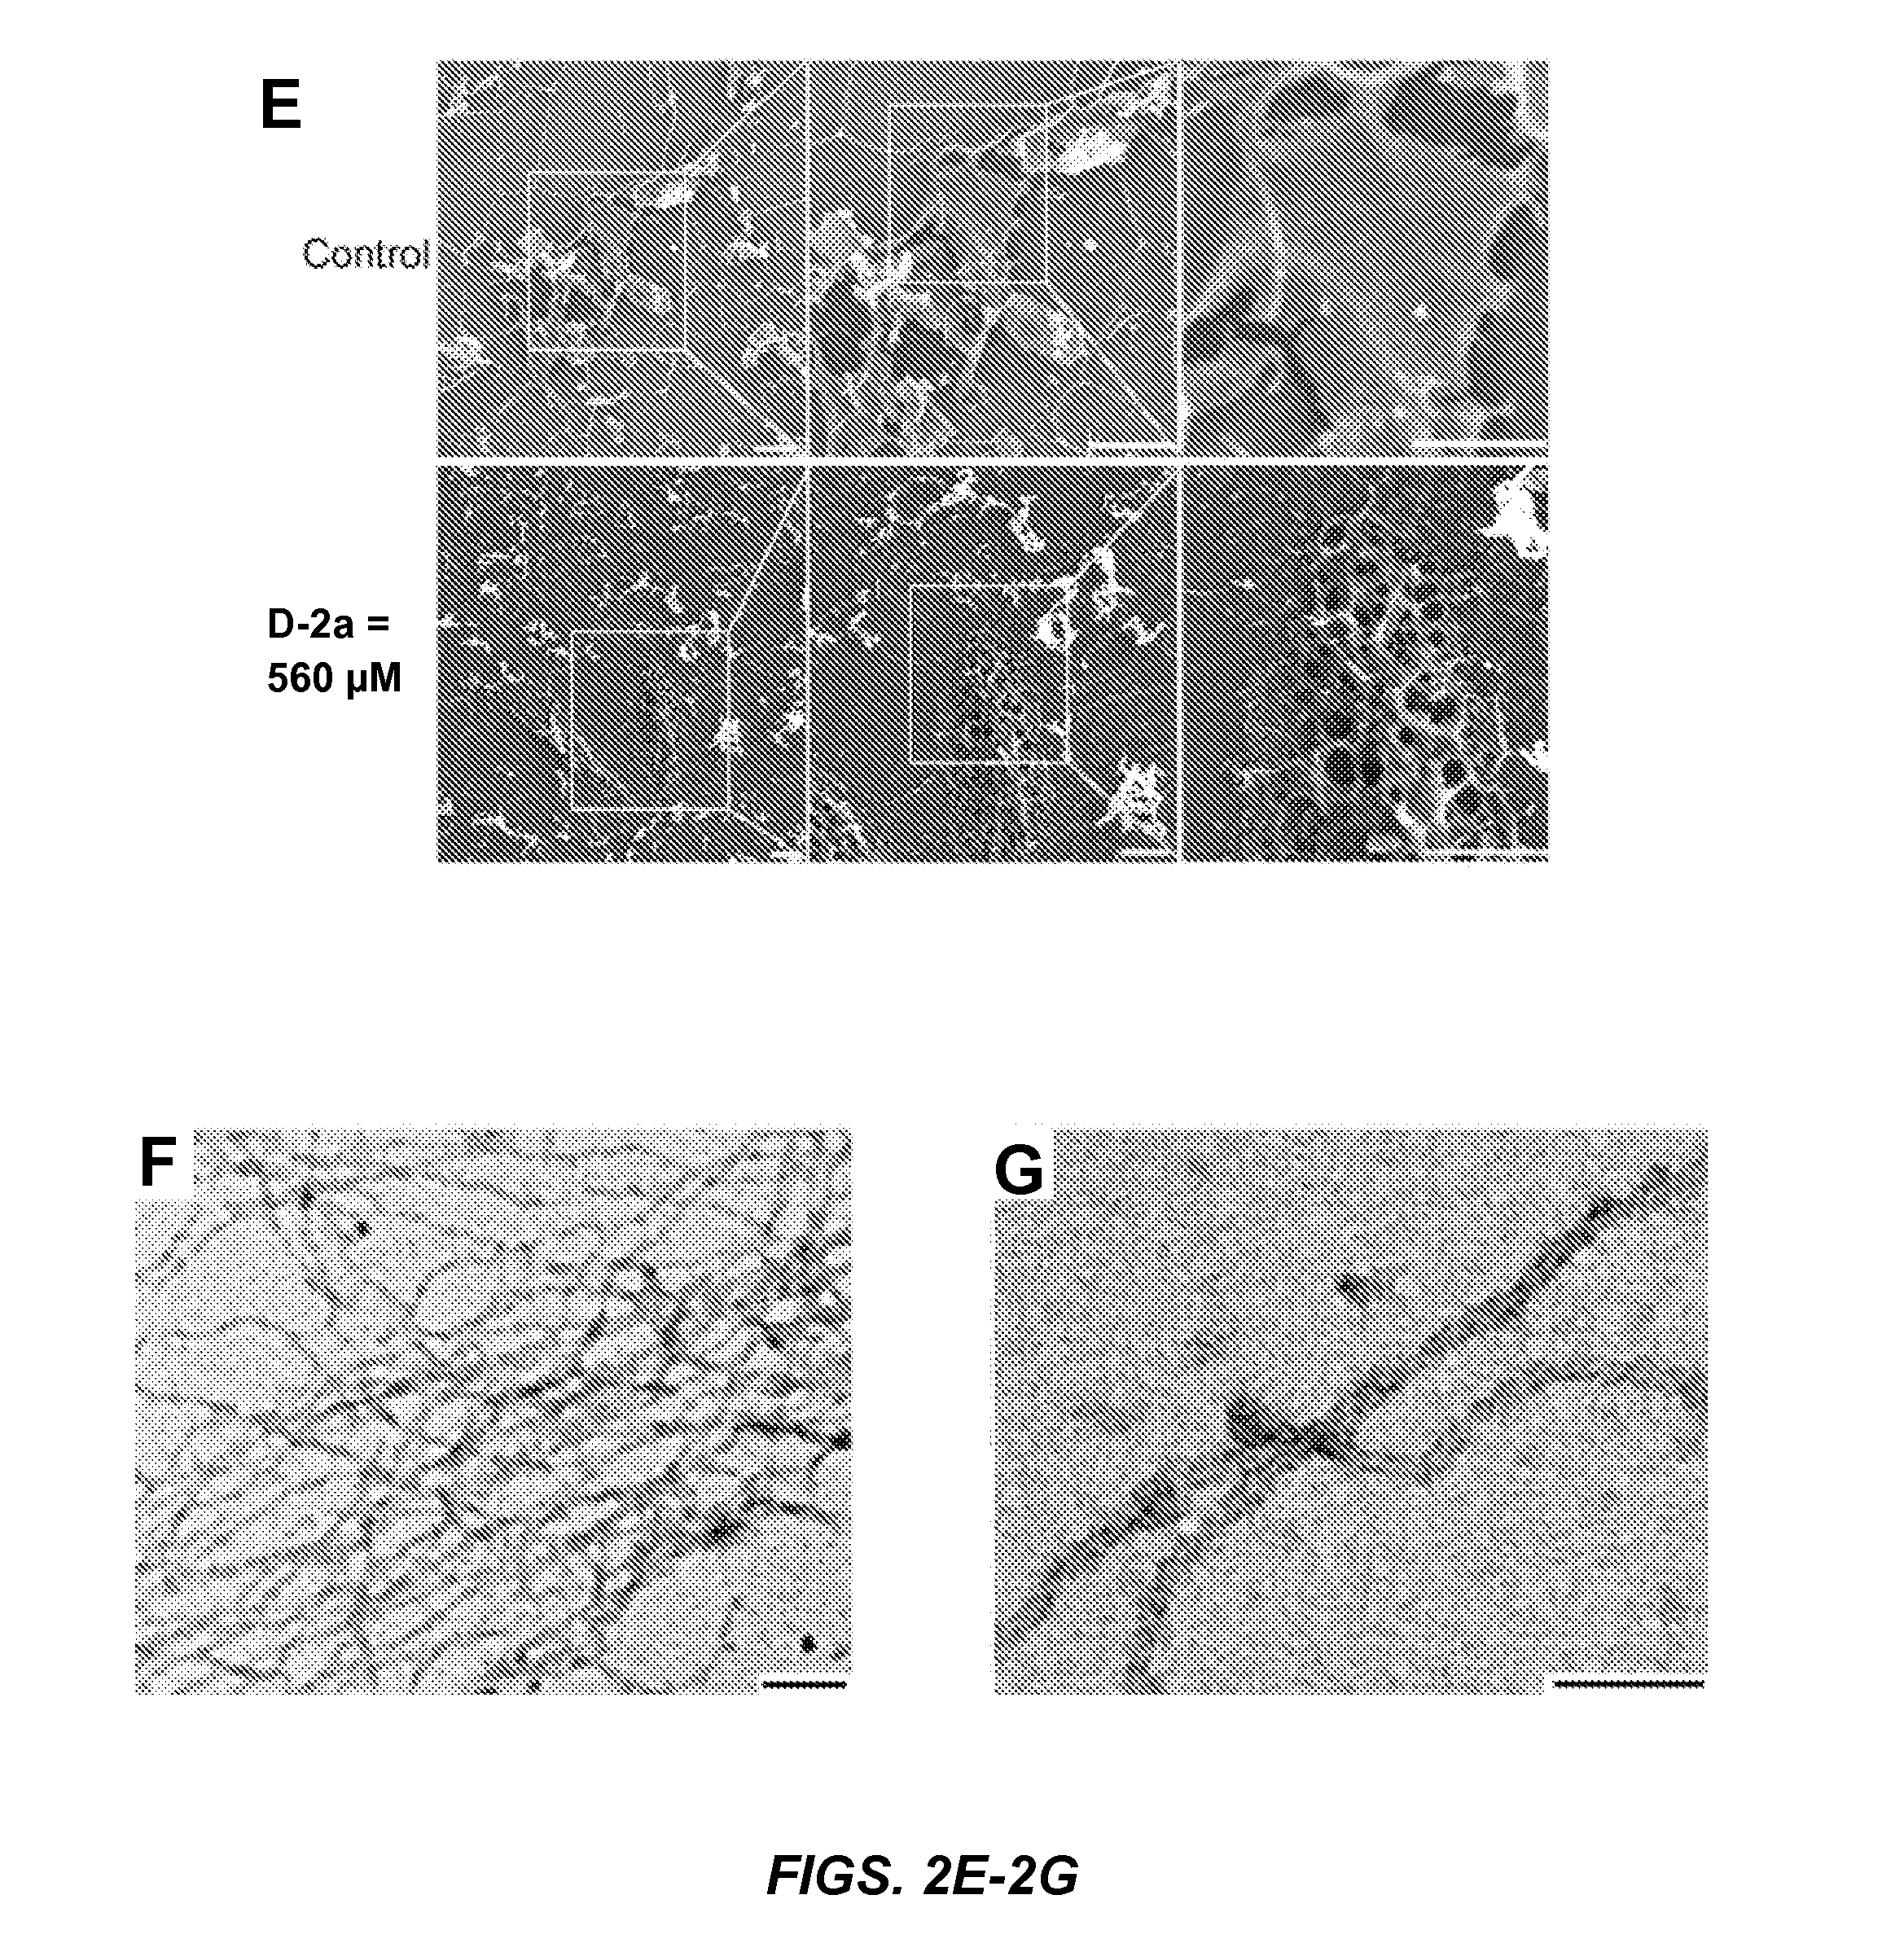 Synthetic peptides, enzymatic formation of pericellular hydrogels/nanofibrils, and methods of use